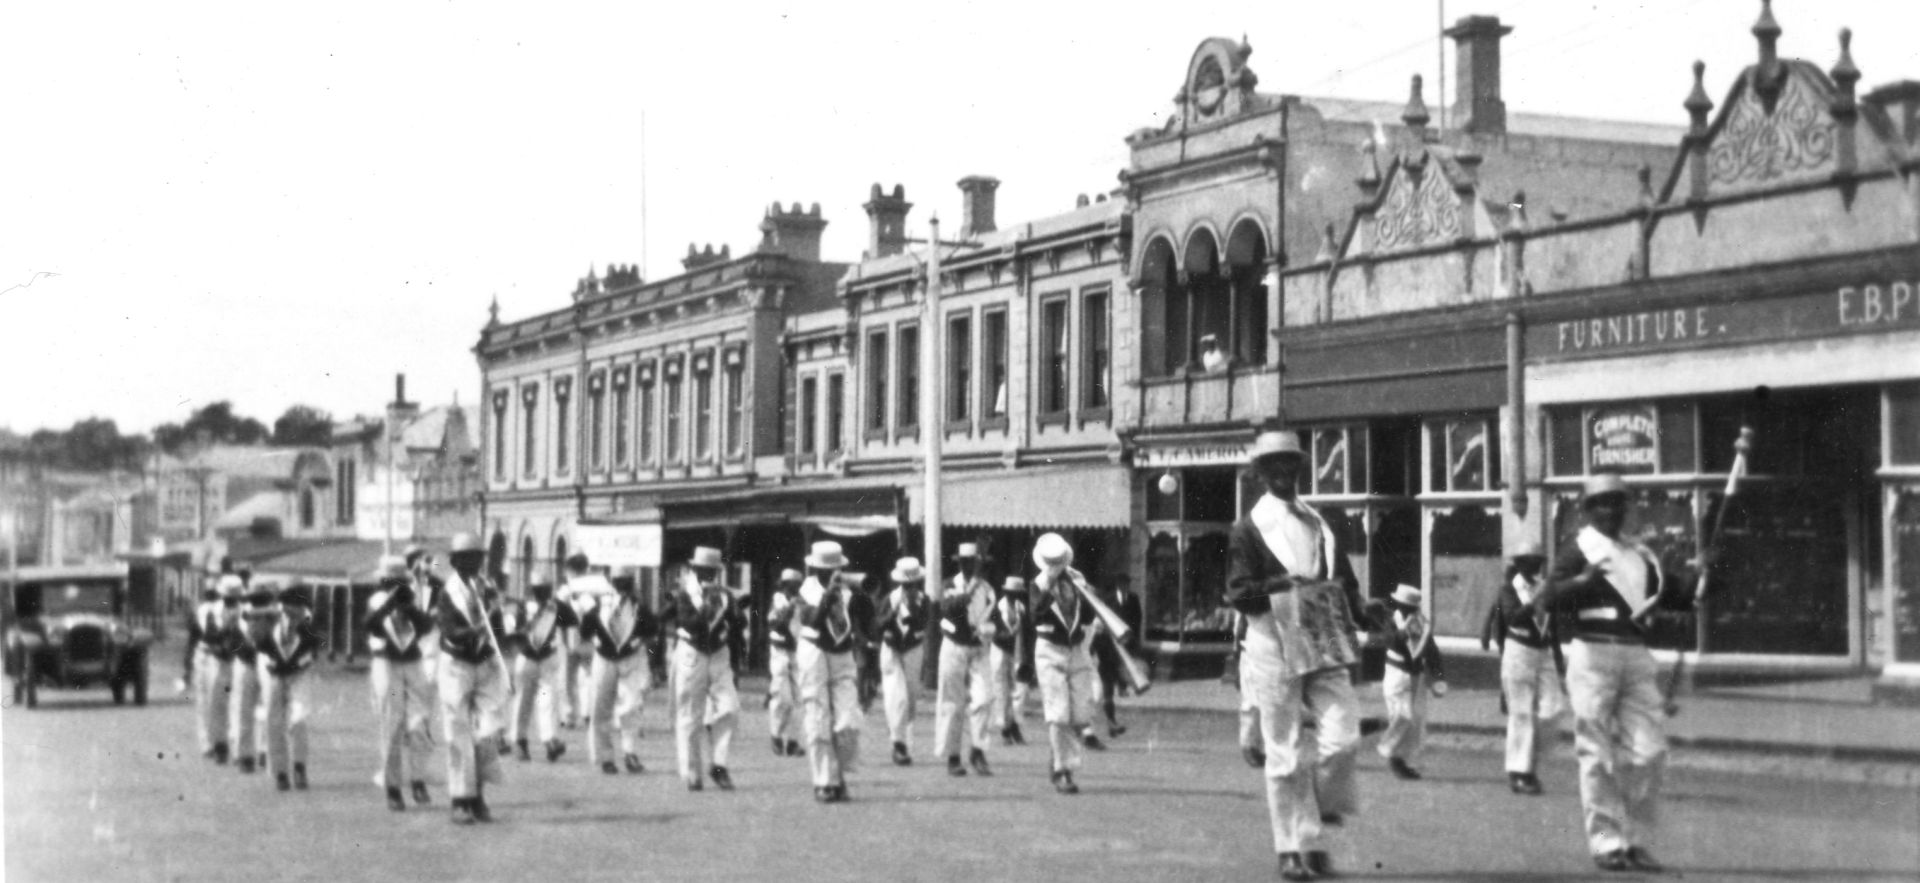 Black faces in a depression parade in Warrnambool - perhaps a clue to the photo of FJ and staff with black faces?  Photo: Jones Family Collection.  